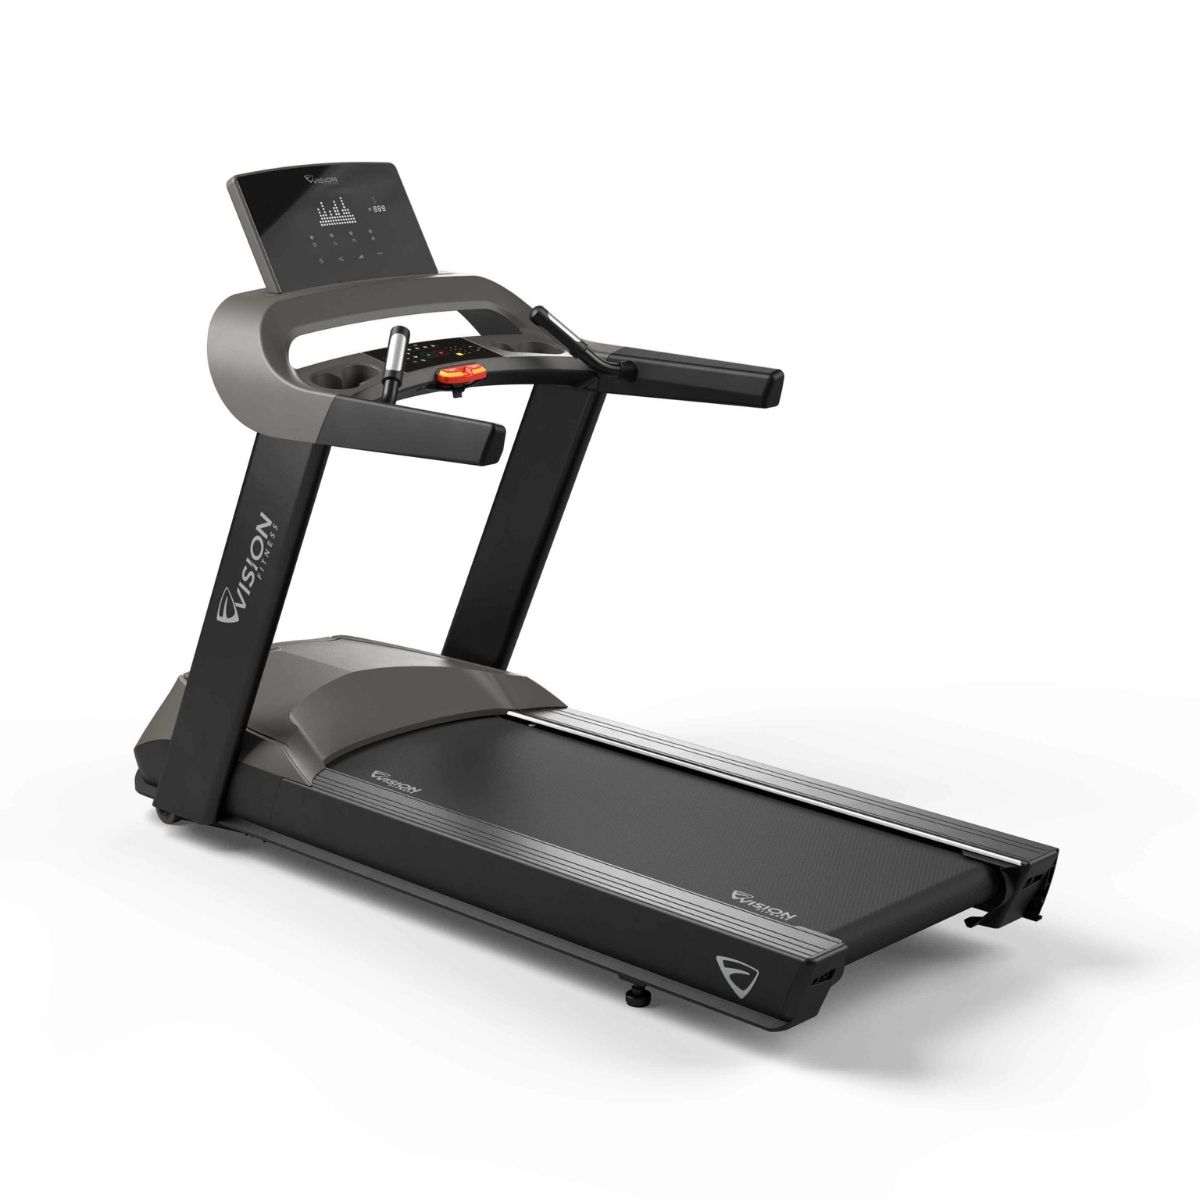 Vision T600 Commercial Treadmill 4.2HP AC – 3-Year Warranty And Service Plan